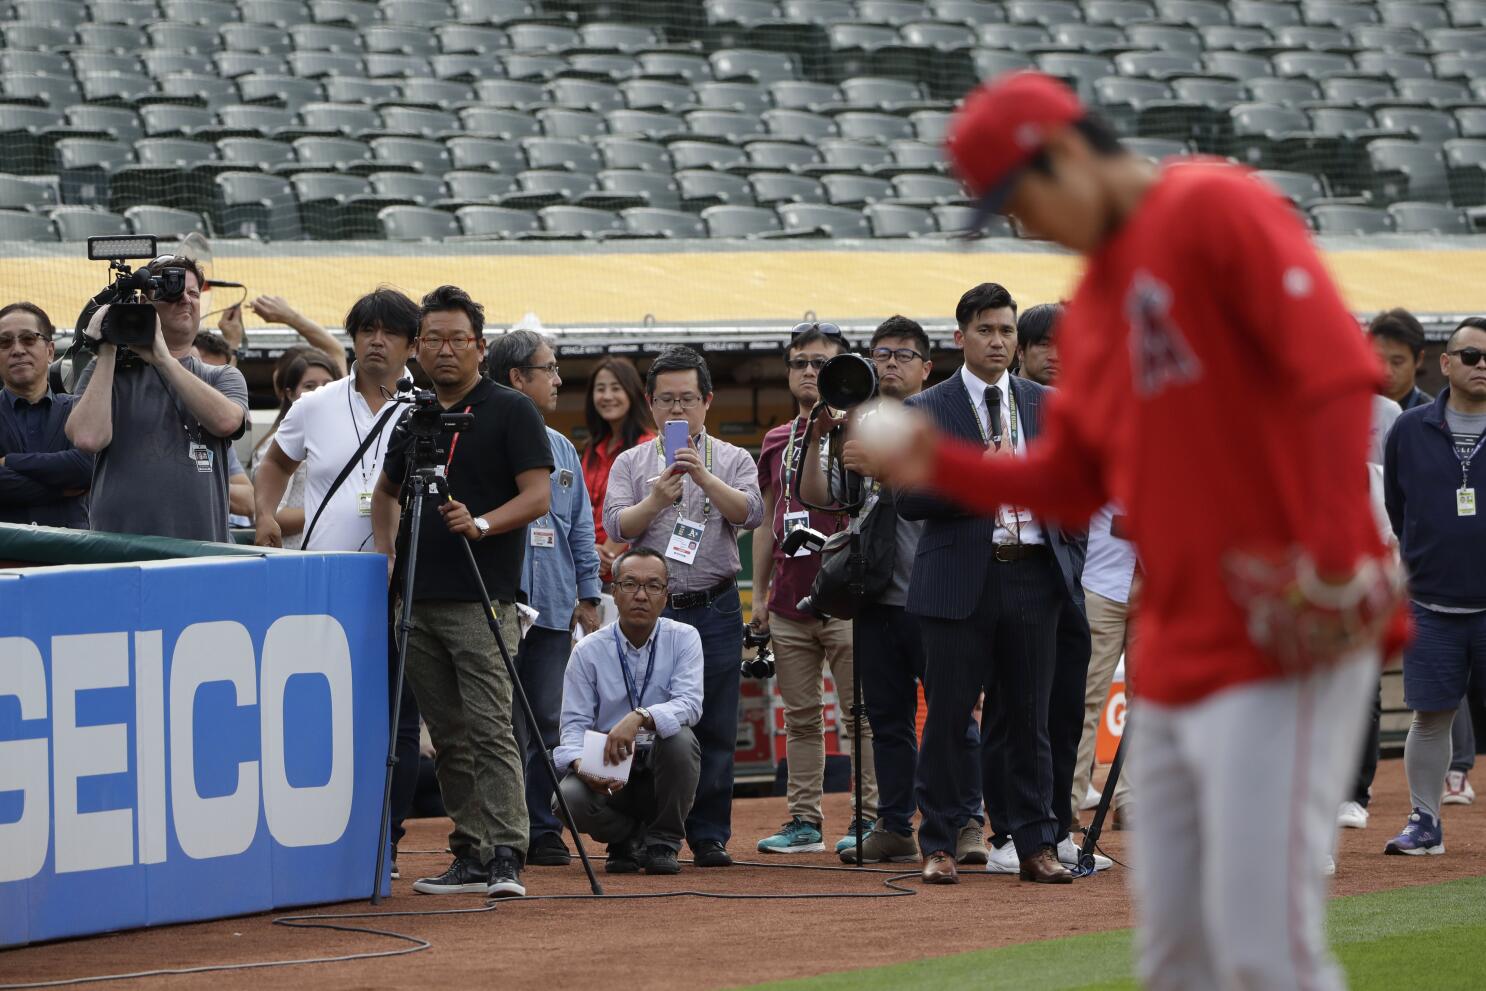 Shohei Ohtani is 'Made In Japan' with American adaptations